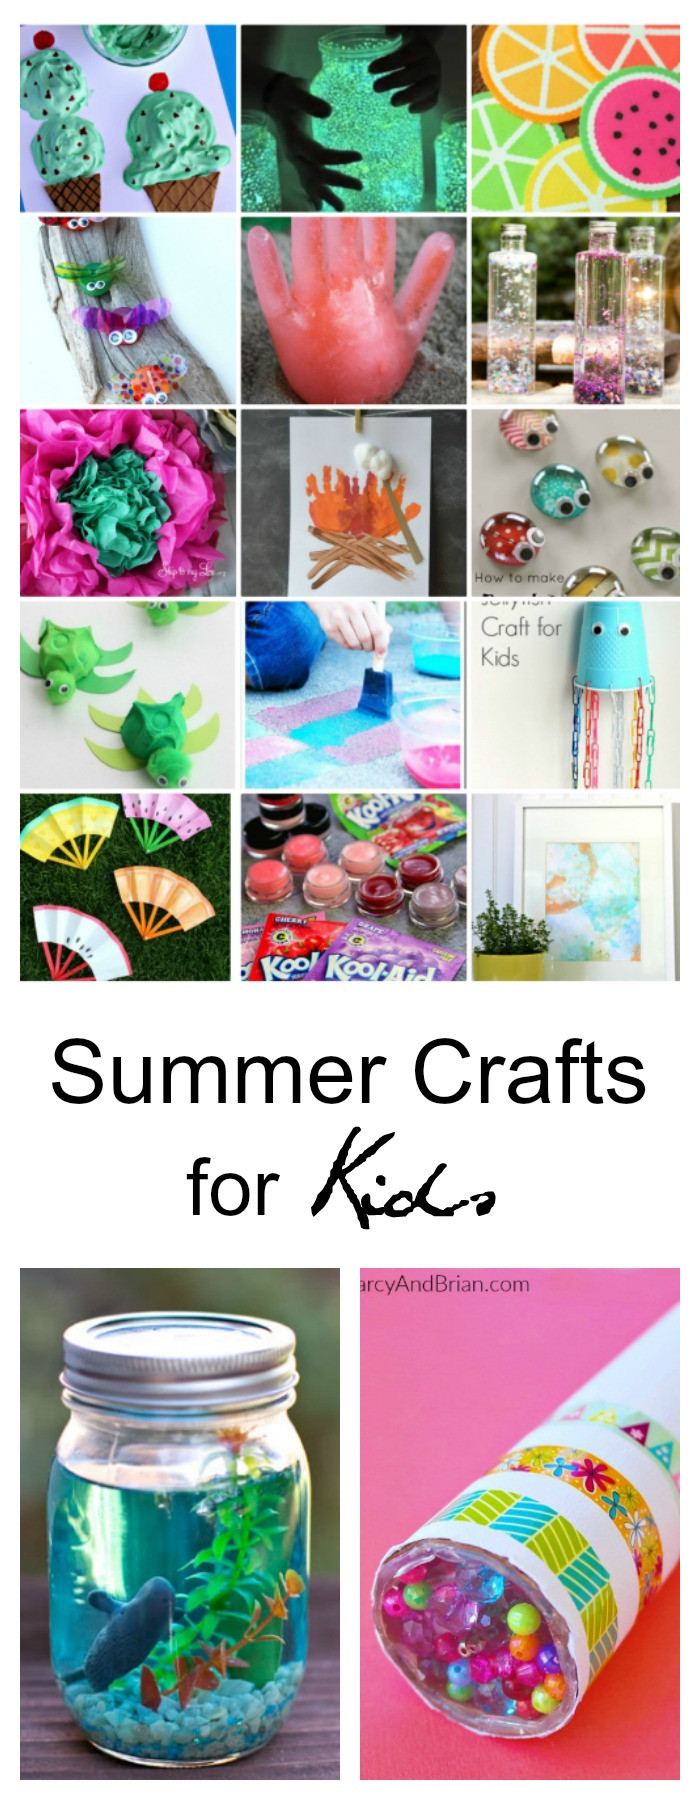 Cool Crafts For Kids
 40 Creative Summer Crafts for Kids That Are Really Fun